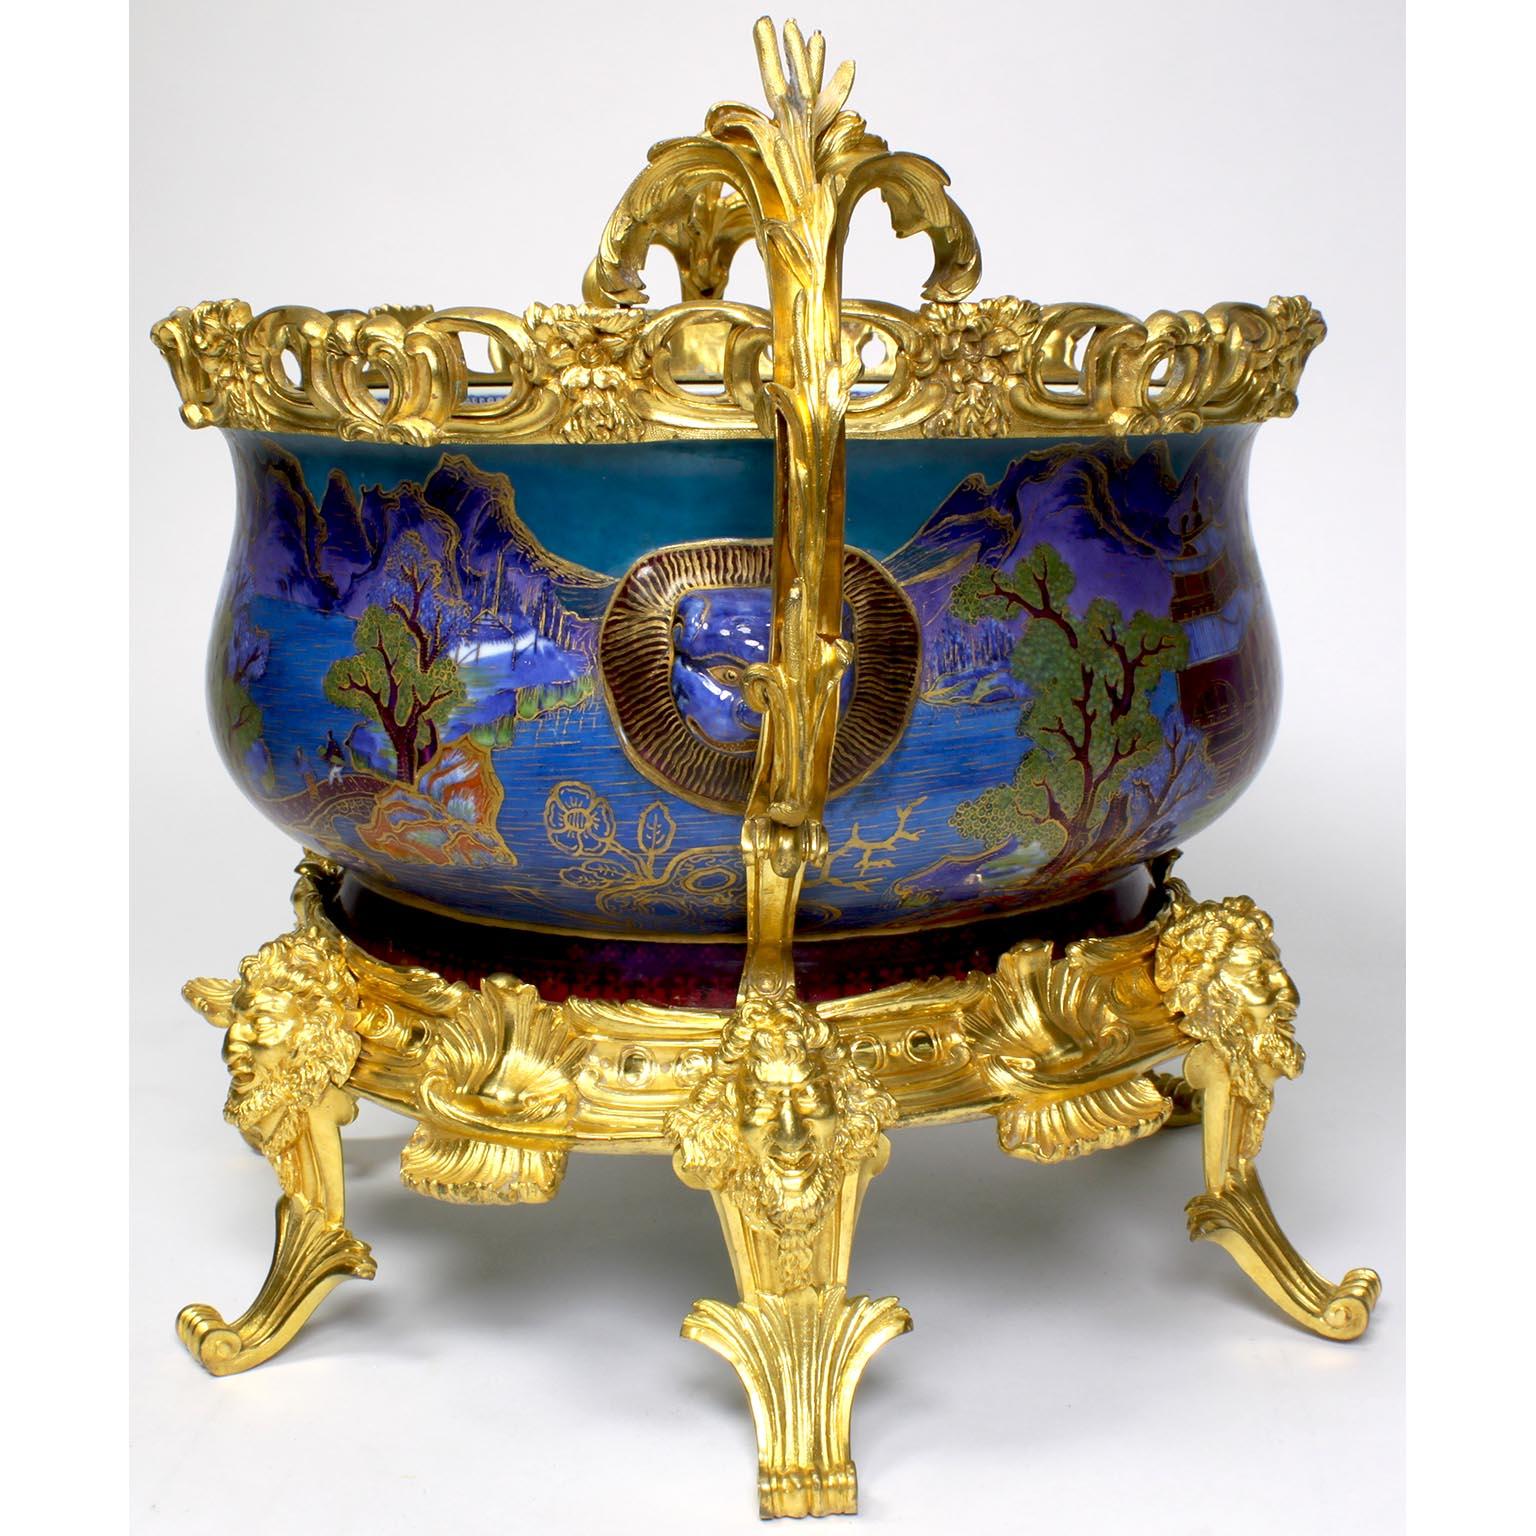 Chinese Export Famille Verte Porcelain & French Ormolu Chinoiserie Centerpiece For Sale 5